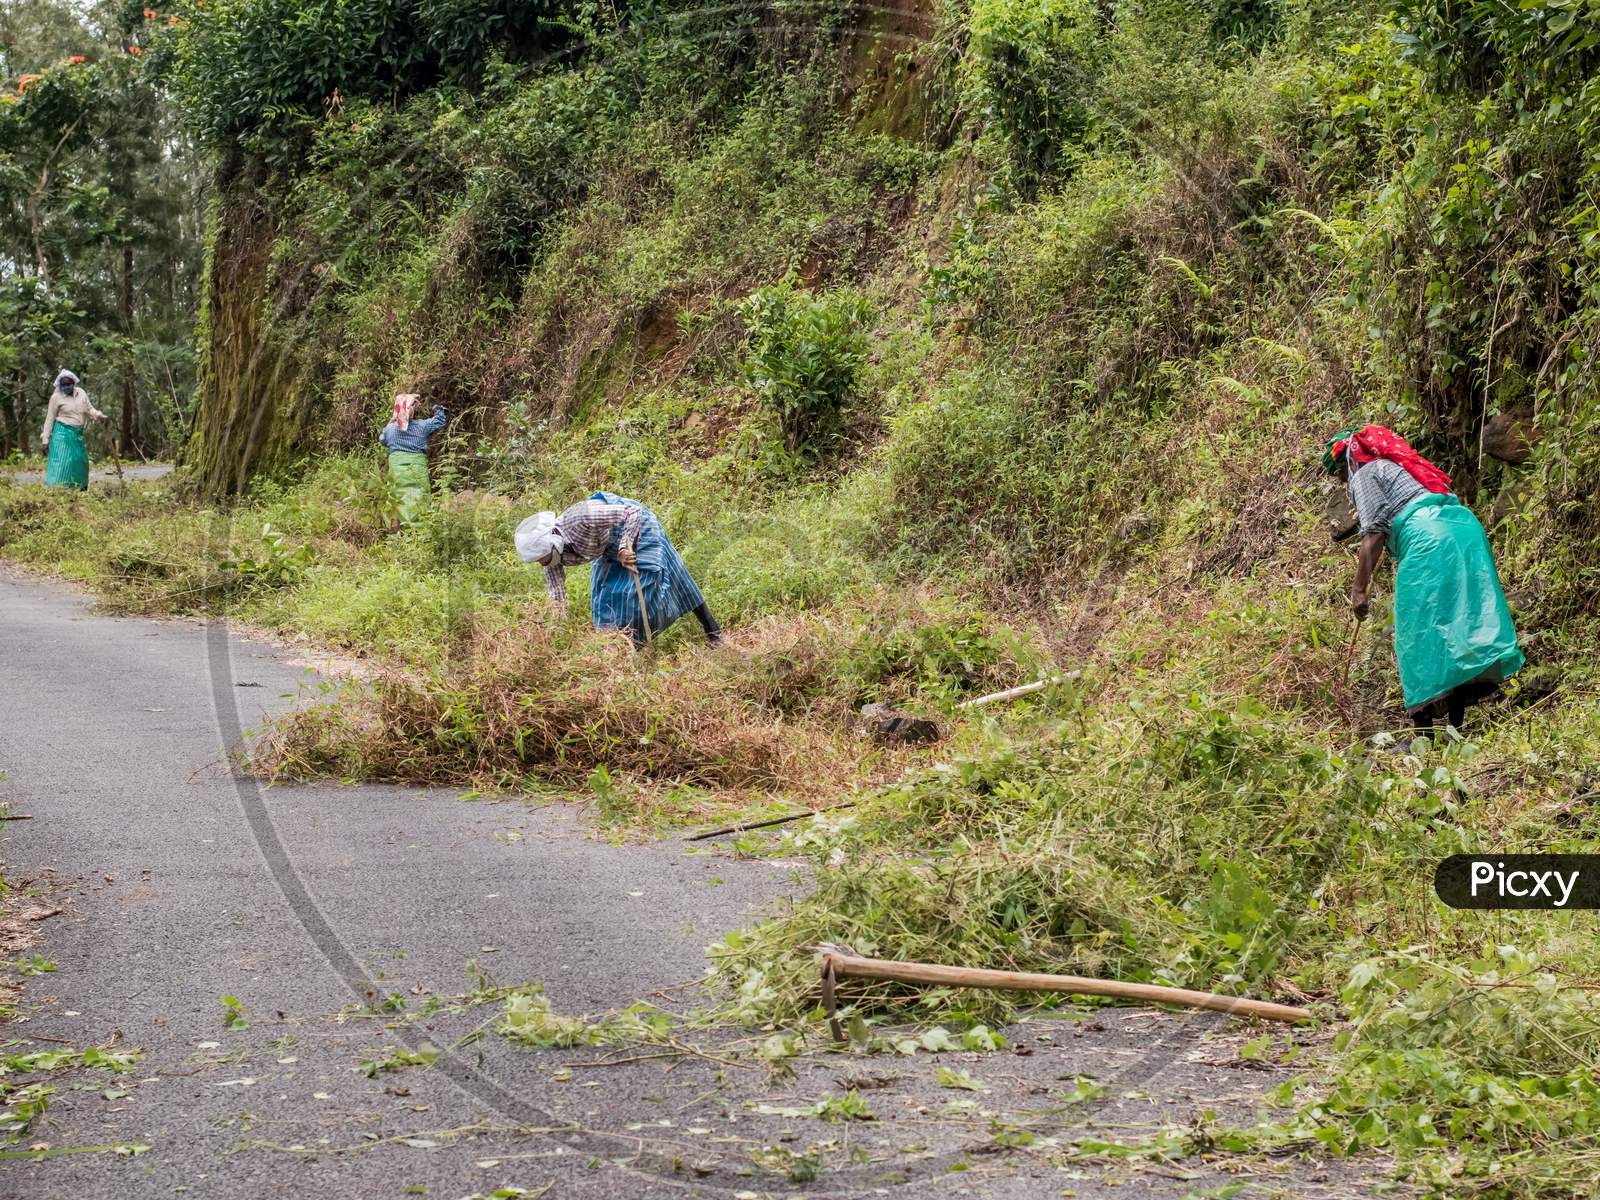 Meppadi,Kerala / India - Oct 06 2020 :- Mgnrega (Mahatma Gandhi National Rural Employment Guarantee Act) Woman Workers Cleaning The Road On The Way To Chembra Peak, Cutting Grass.